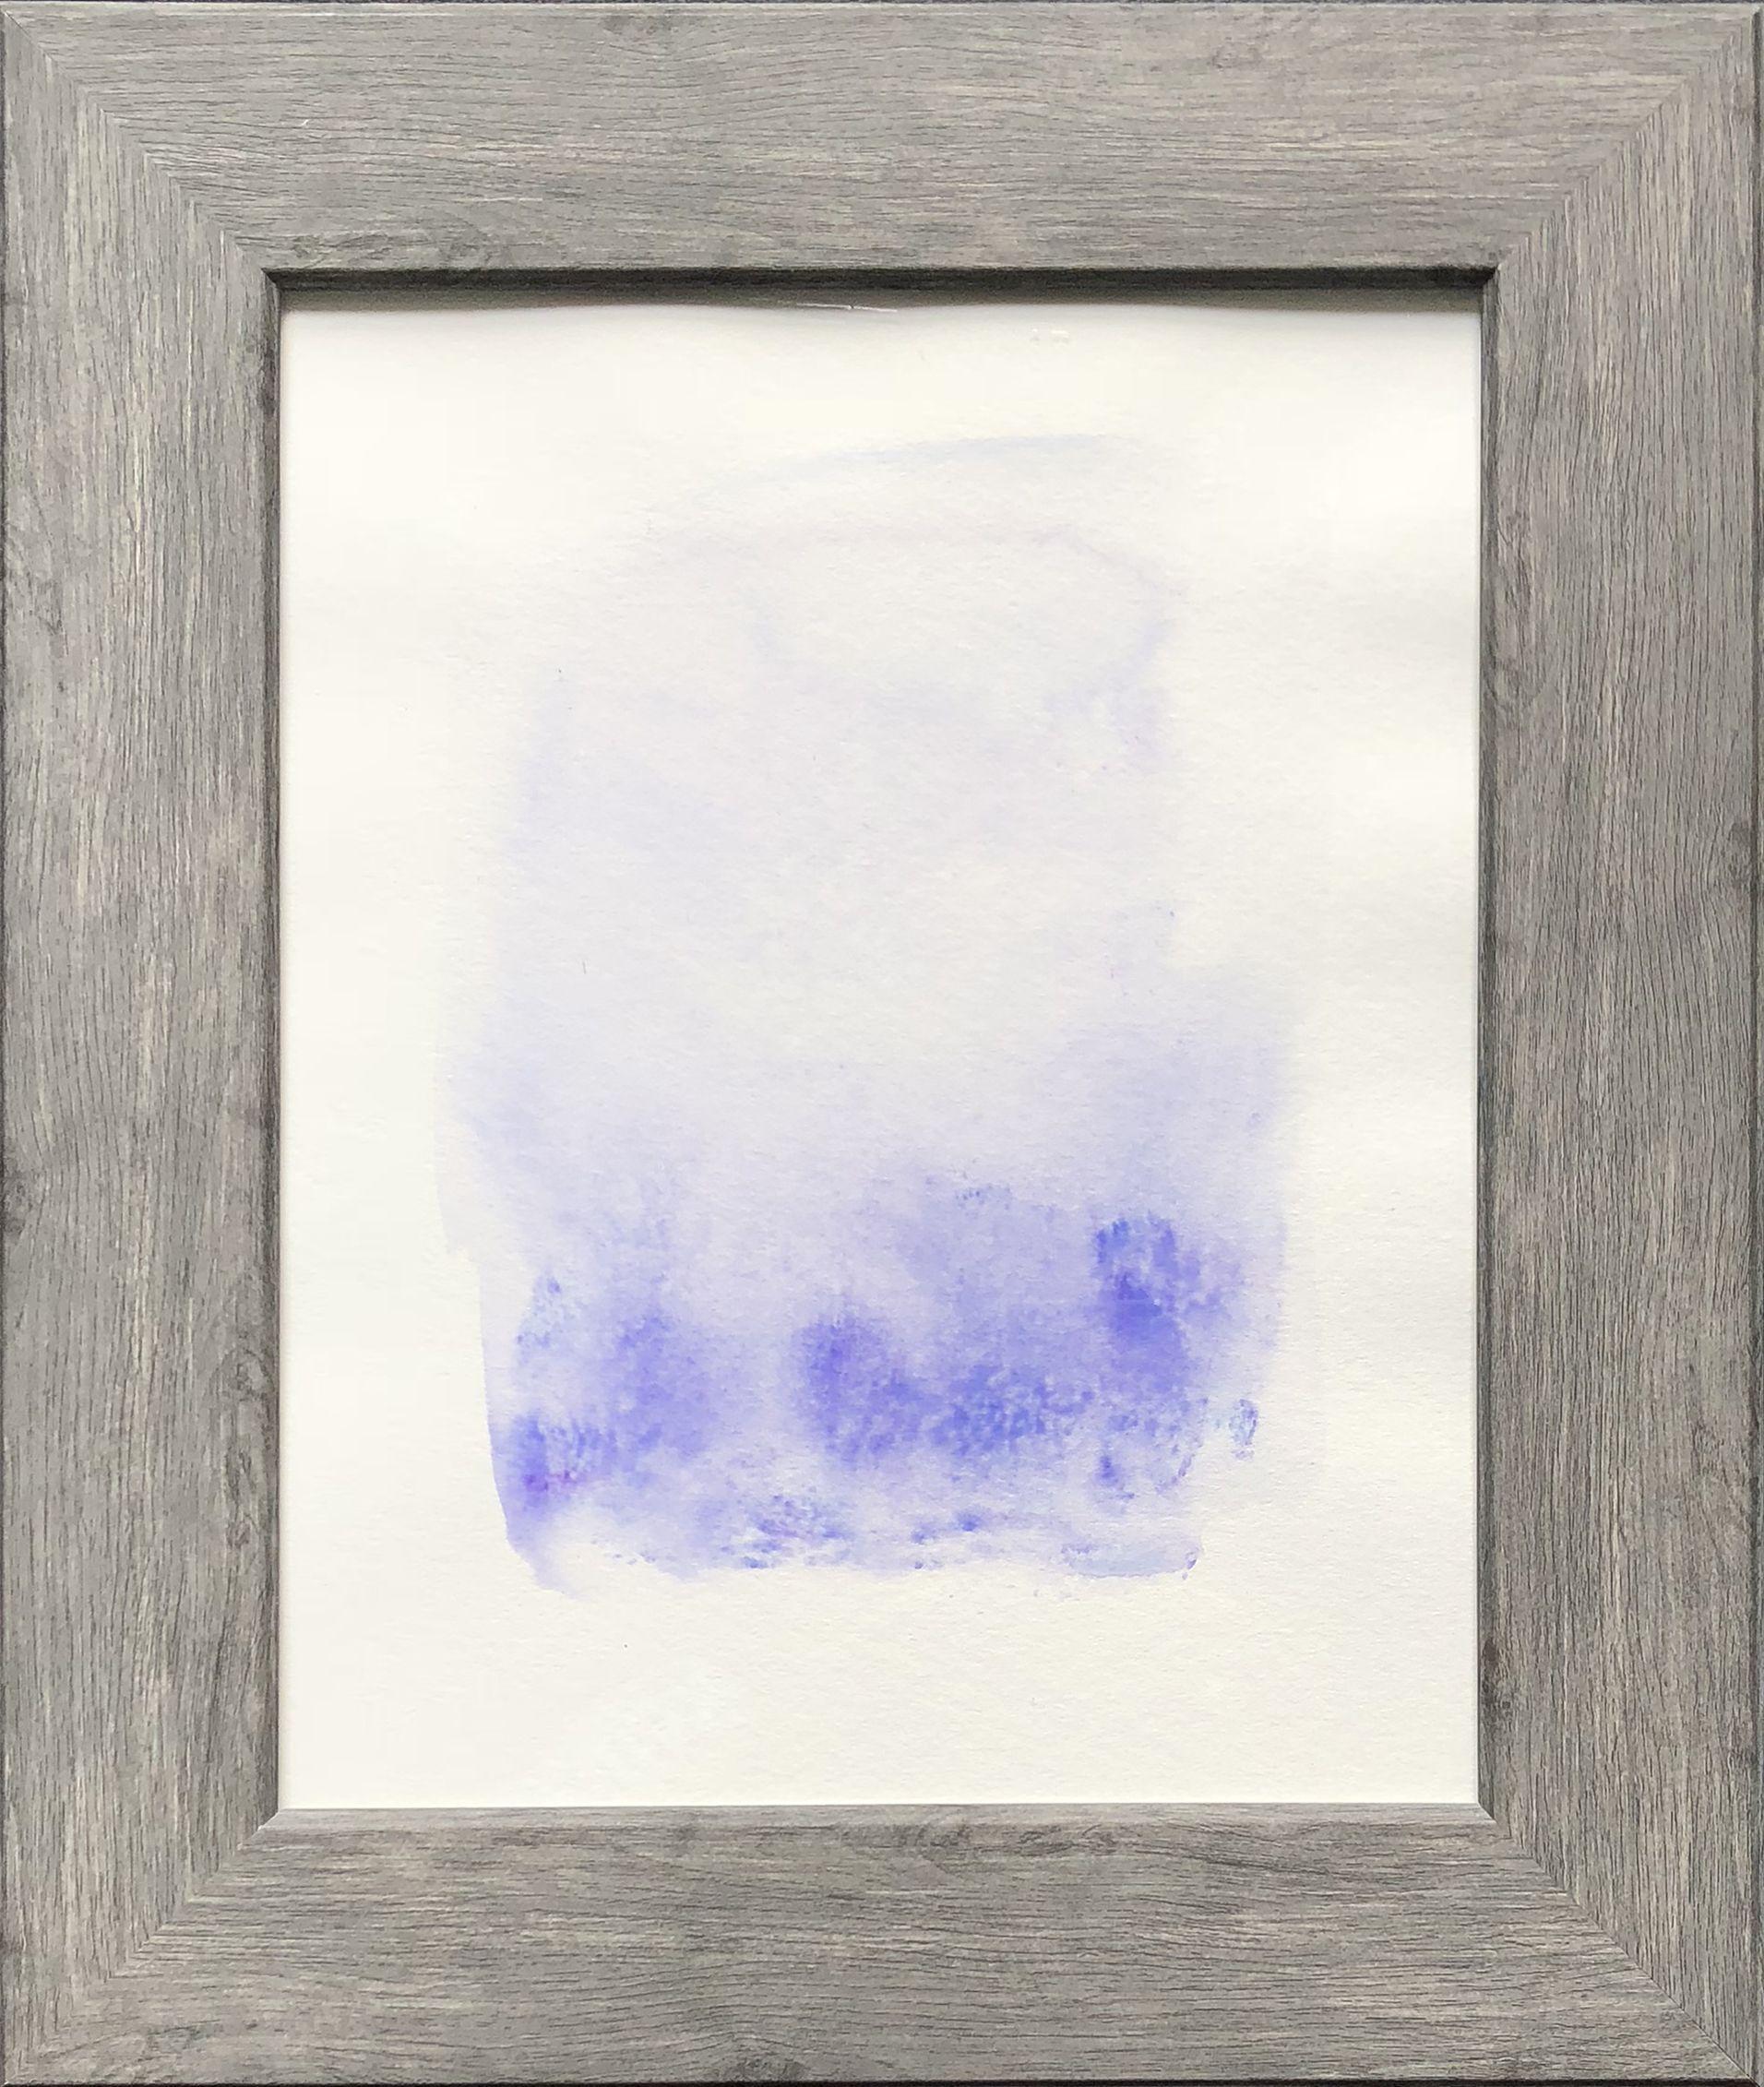 Painted with acrylics, in a watercolour technique has given a richness and depth to this framed piece. It is part of a pair. Look for the matching listing by the same name. This heavy premium watercolour paper always takes on a pleasing wavy lilt